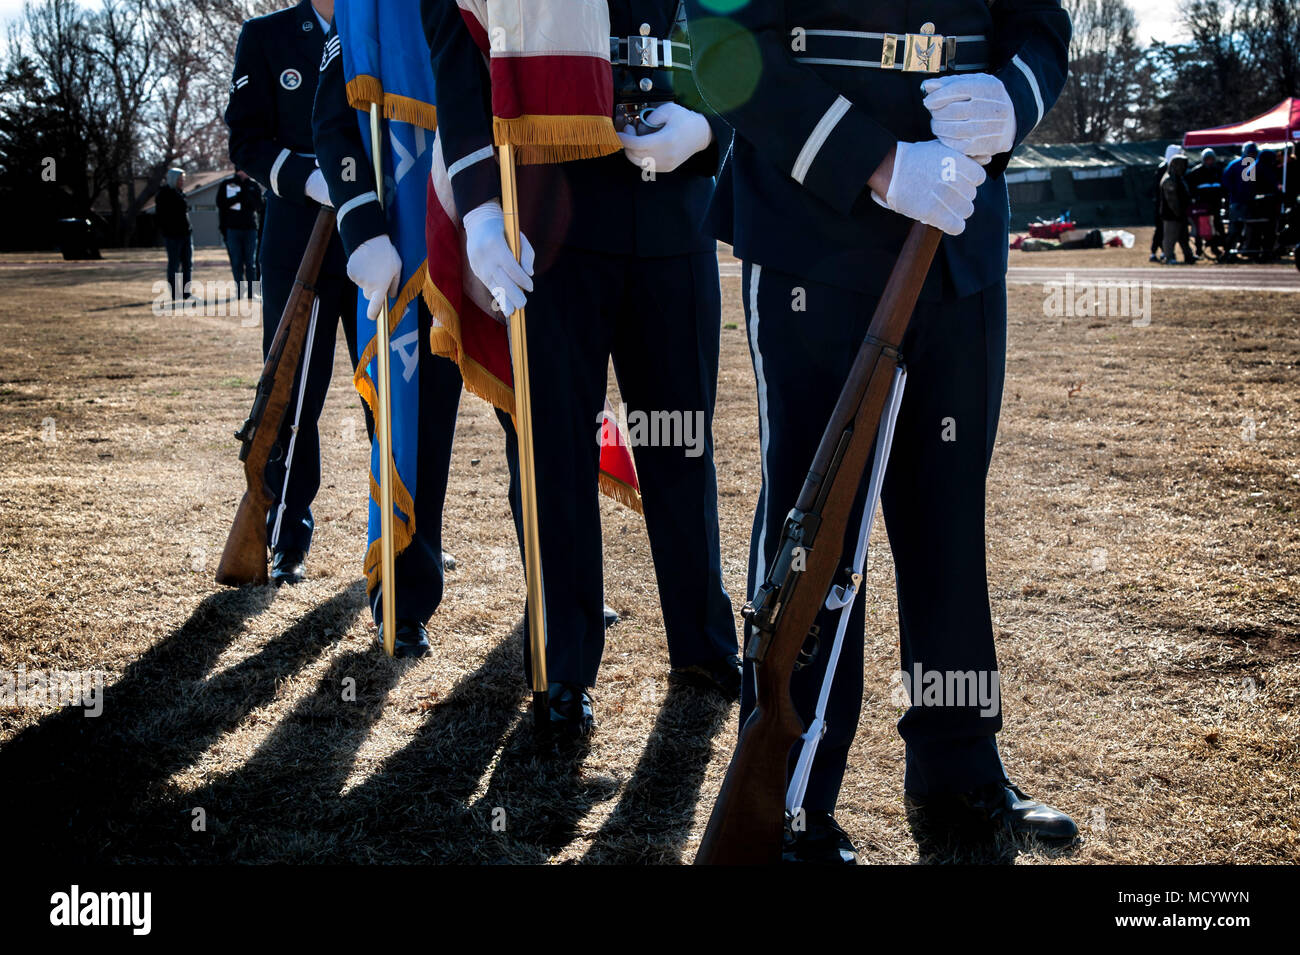 The Vance Air Force Base Honor Guard waits in formation to present the colors during the Annual Cherokee Strip Area 6 Special Olympics, March 7, 2018, Vance Air Force Base Okla. The first Special Olympics competition was held in 1968. (U.S. Air Force photo by Airman Zachary Heal) Stock Photo